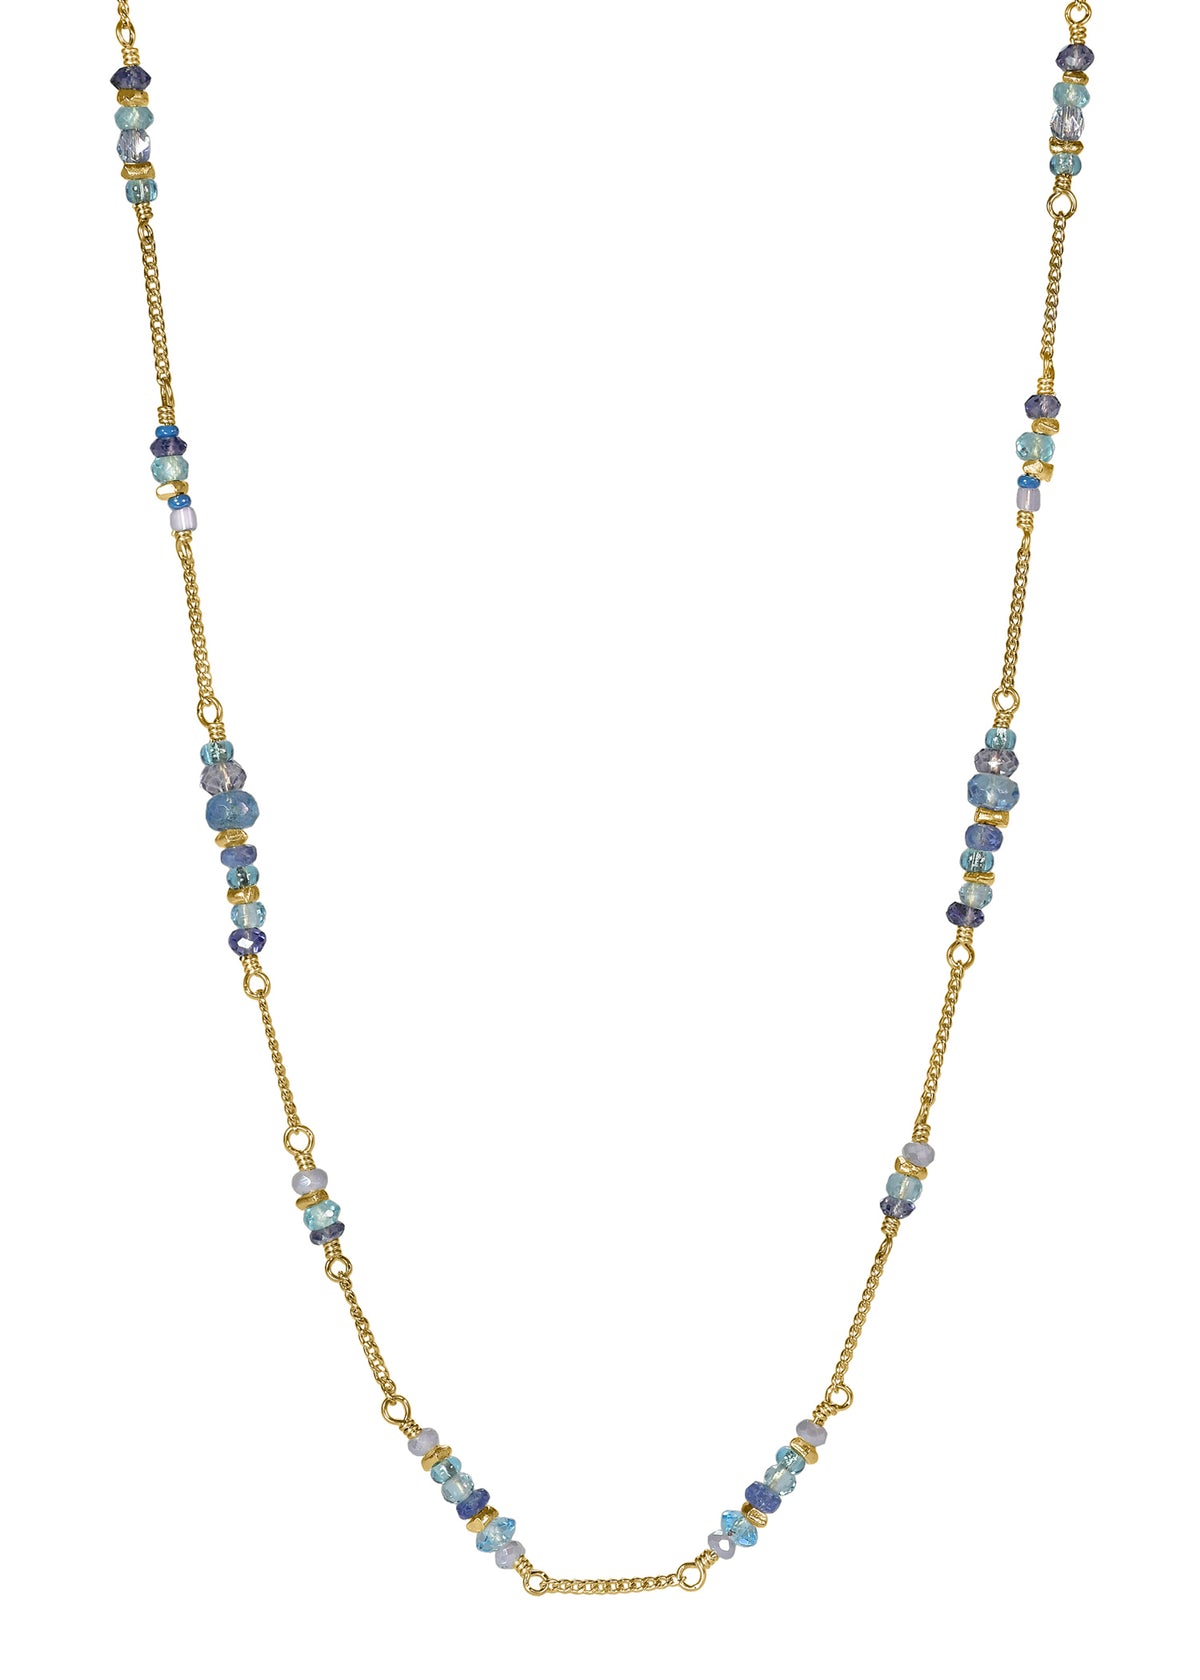 Aquamarine Blue sapphire Lolite Apatite Blue quartz Seed beads Crystal 14k gold fill Necklace measures 18&quot; in length Handmade in our Los Angeles studio